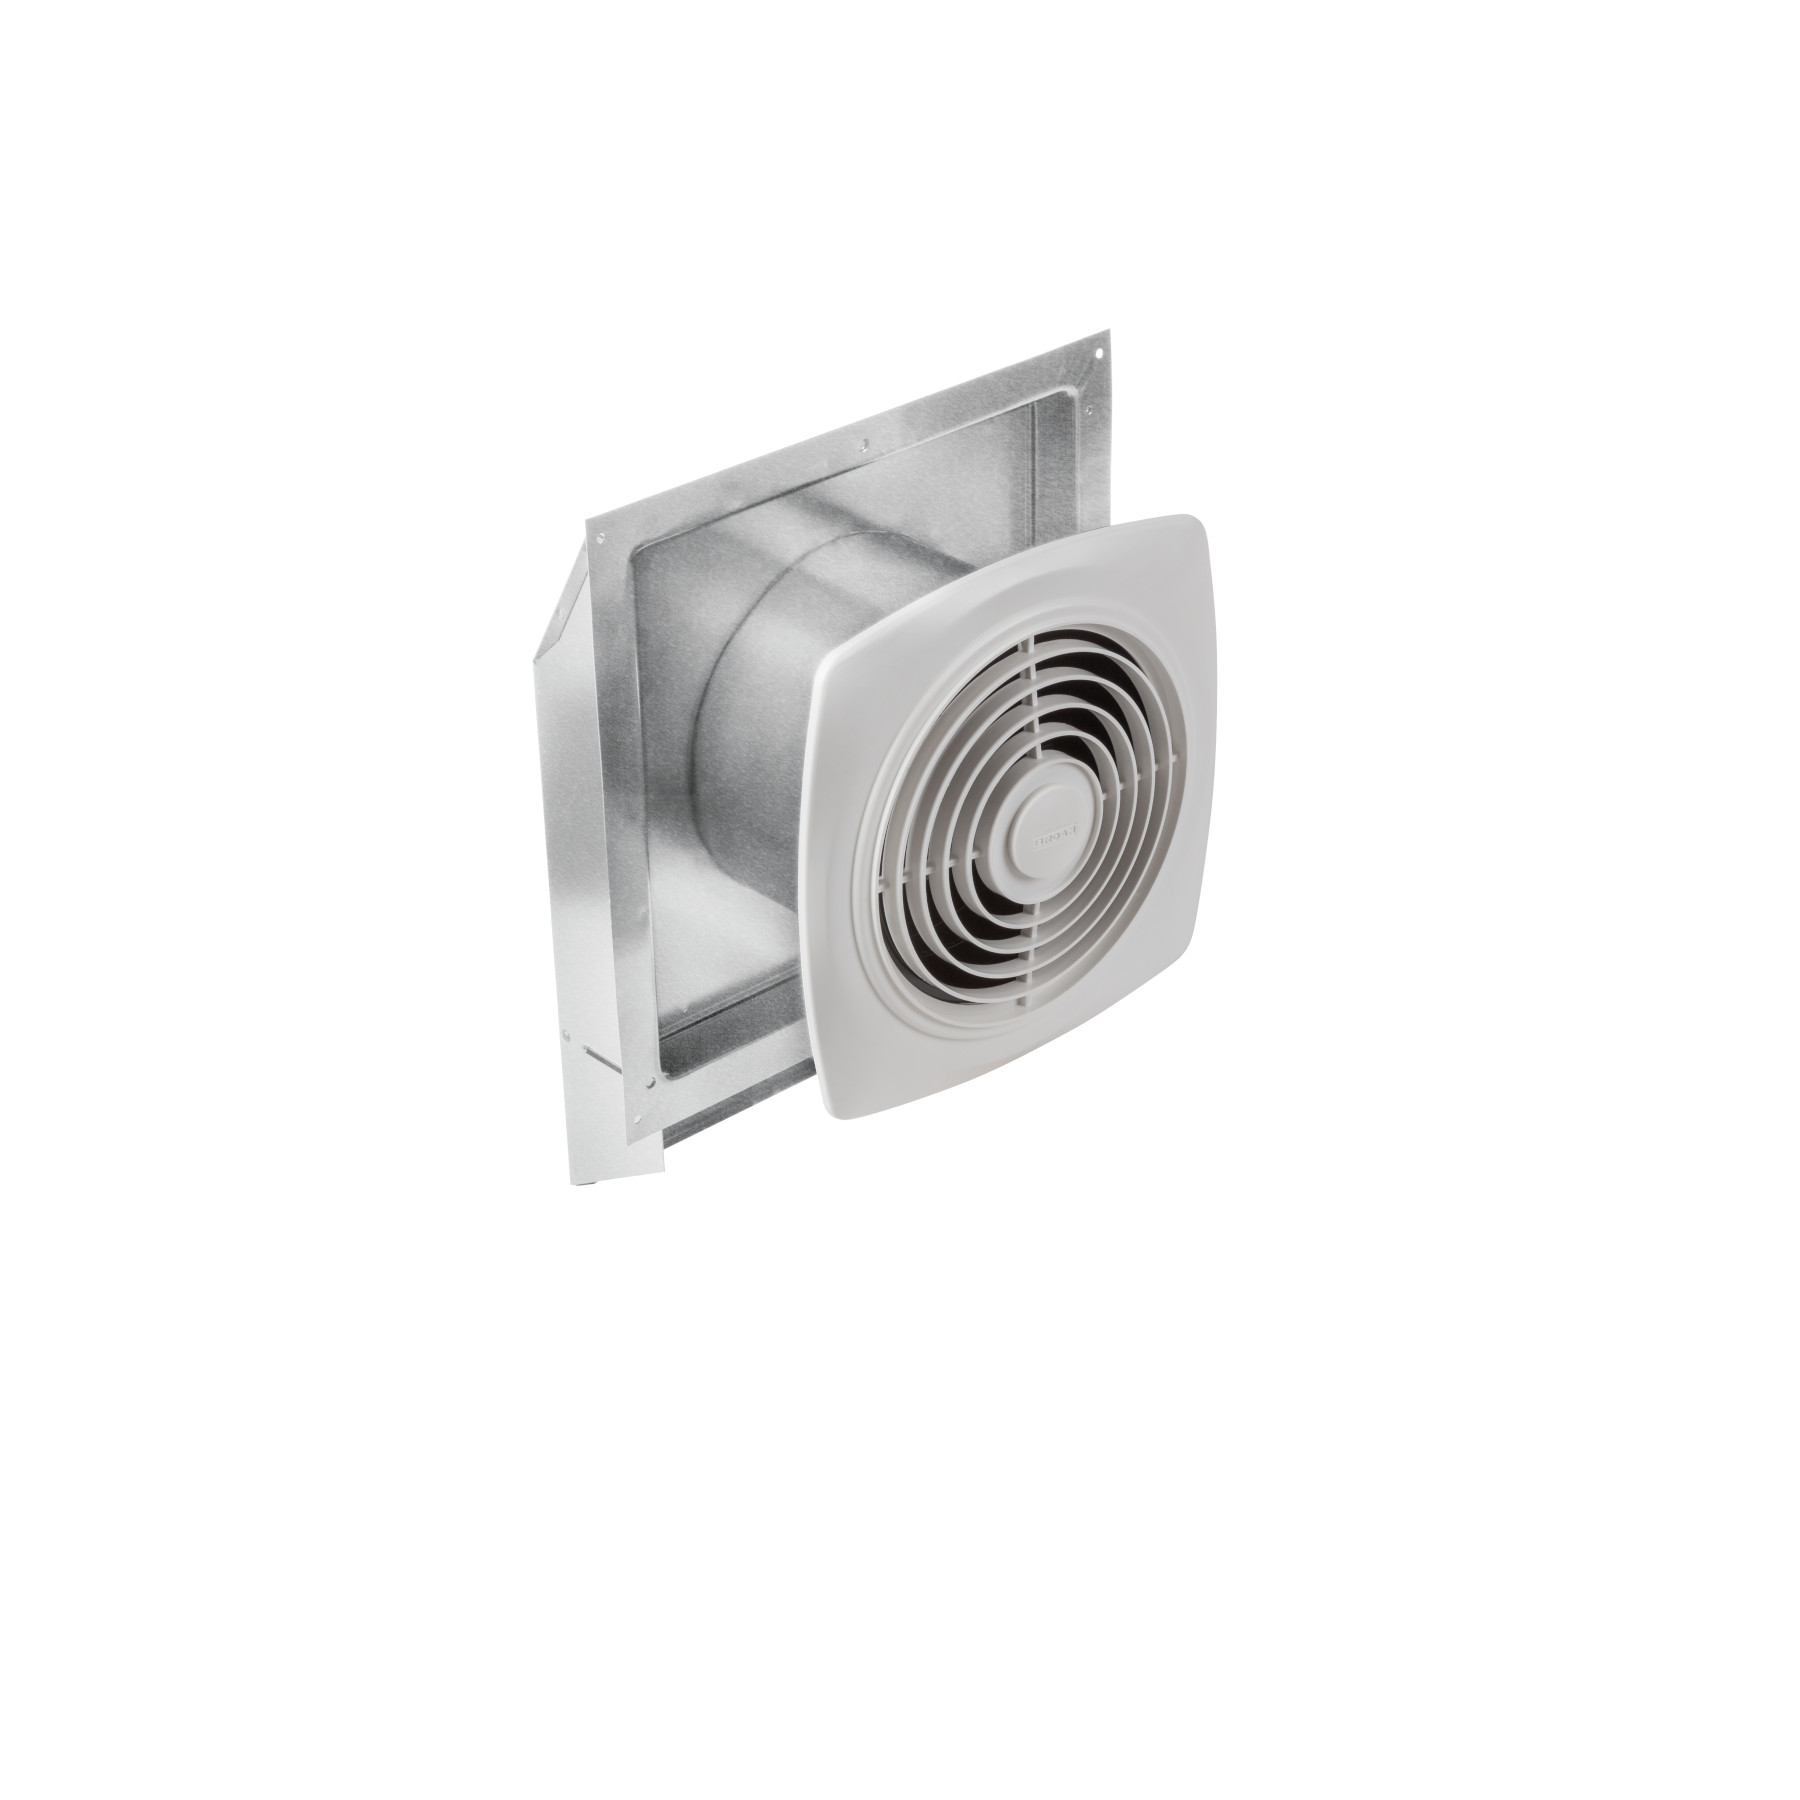 508 Broan 290 Cfm Through Wall Ventilation Fan - Kitchen Wall Exhaust Fan Pull Chain Replacement